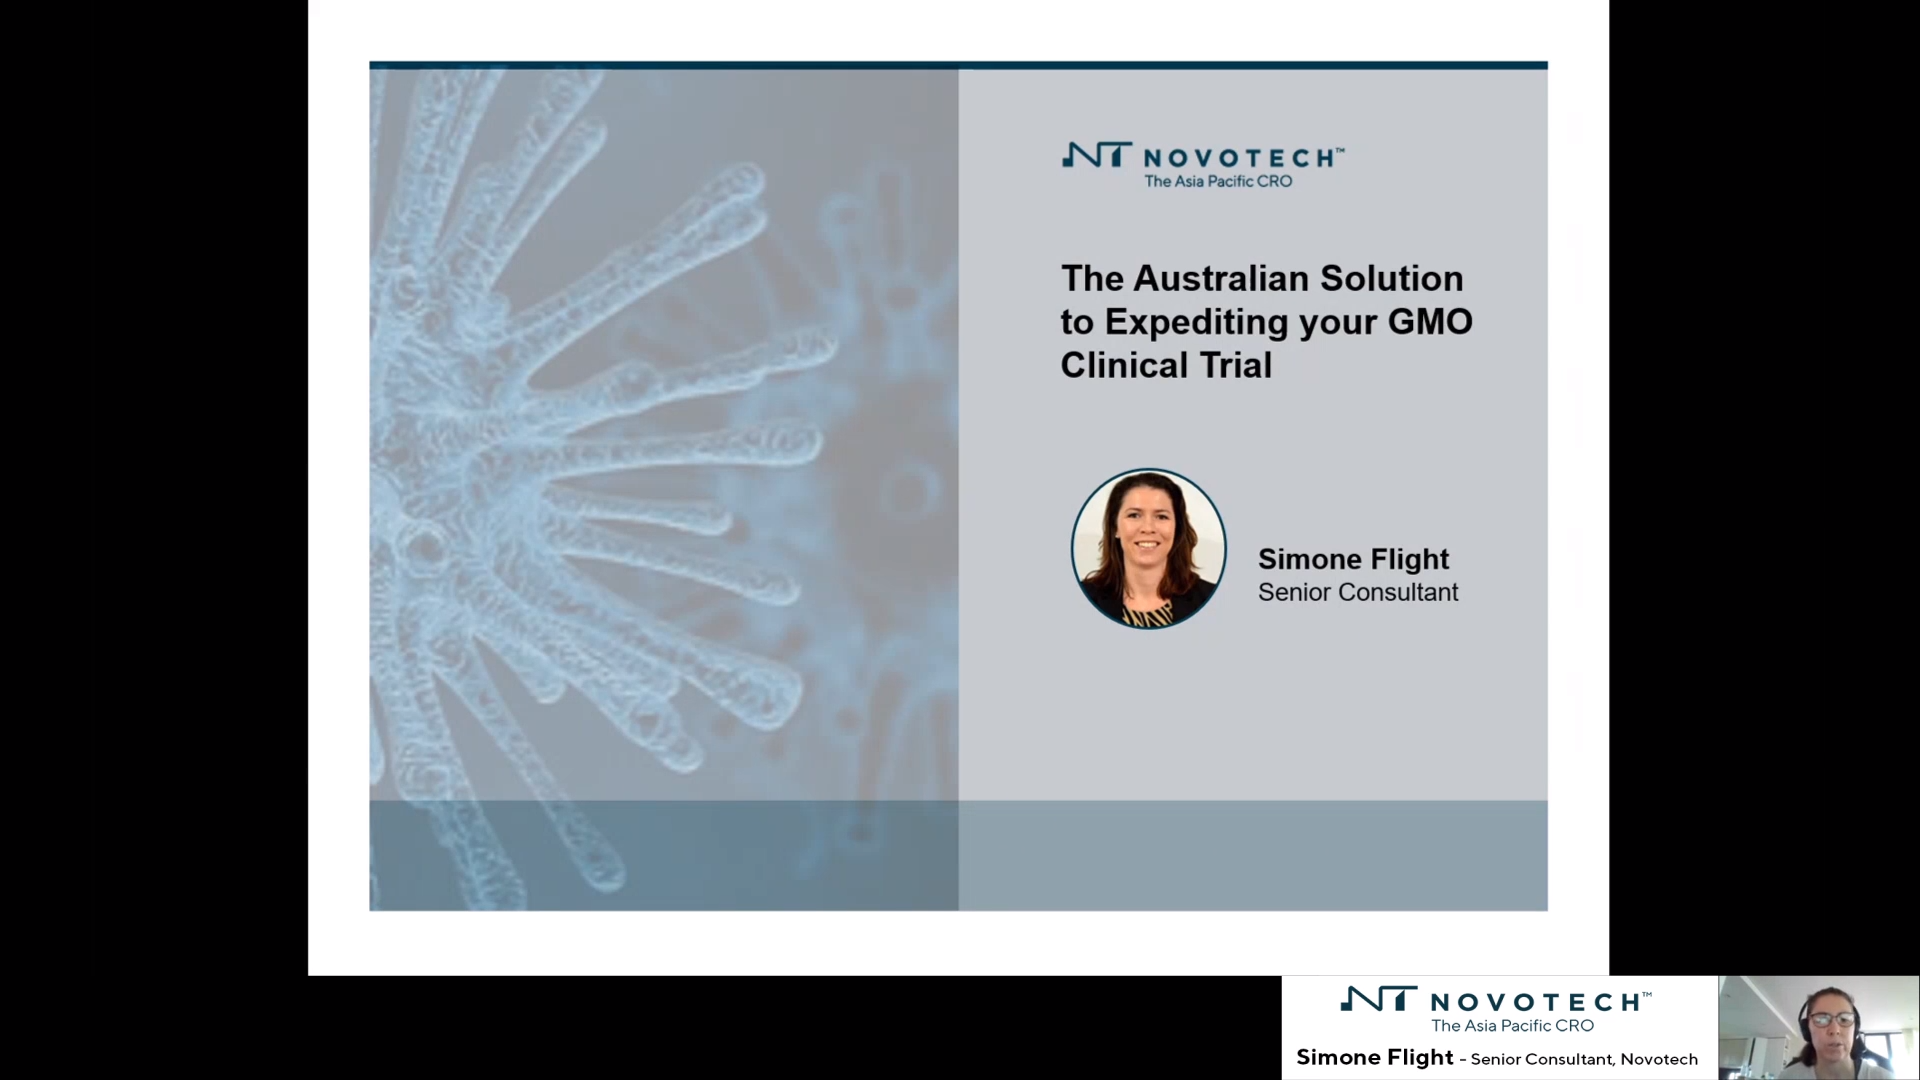 The Australian Solution to expediting your GMO clinical trial